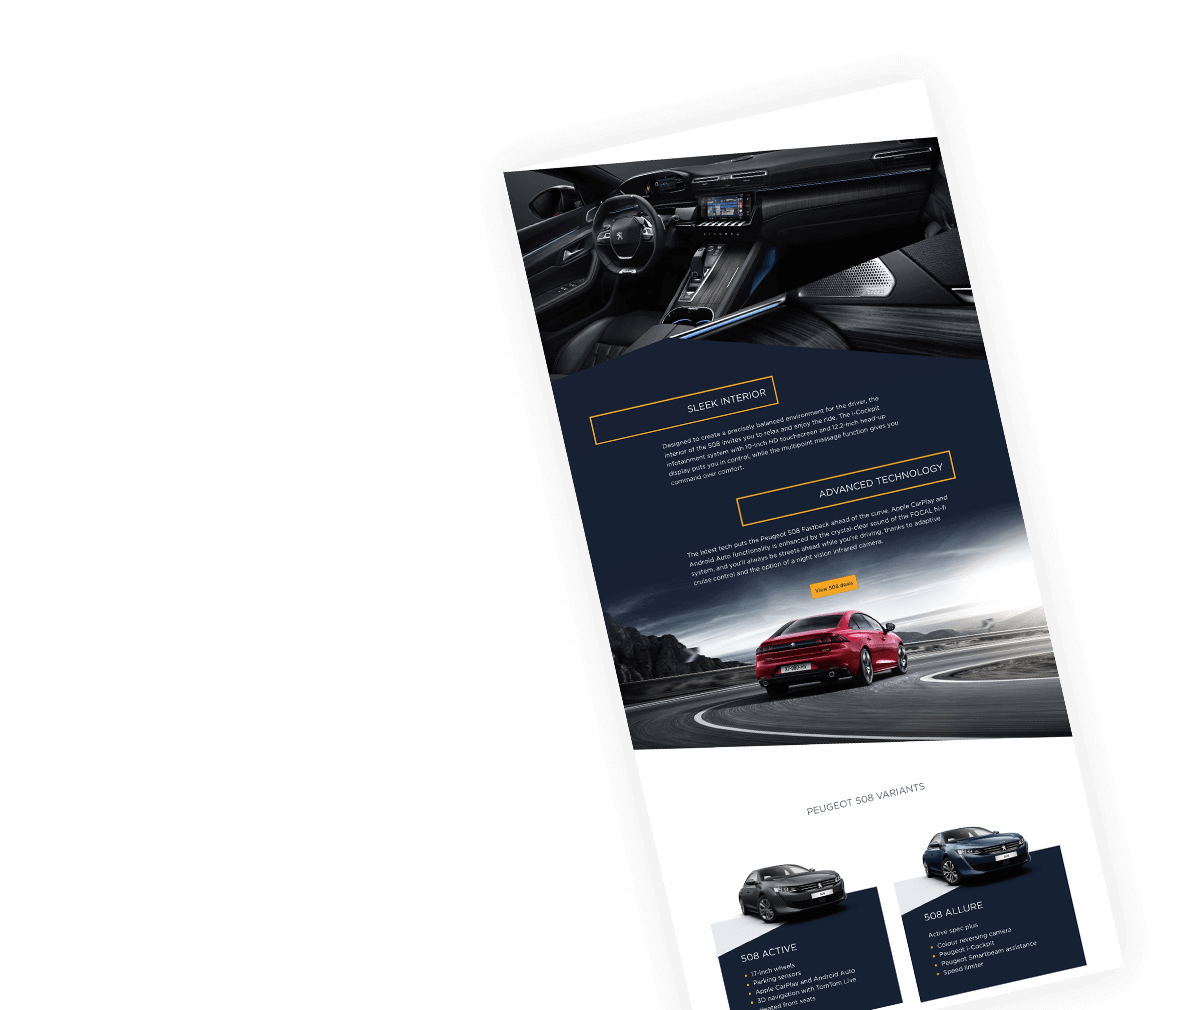 Peugeot landing page for the 508 model